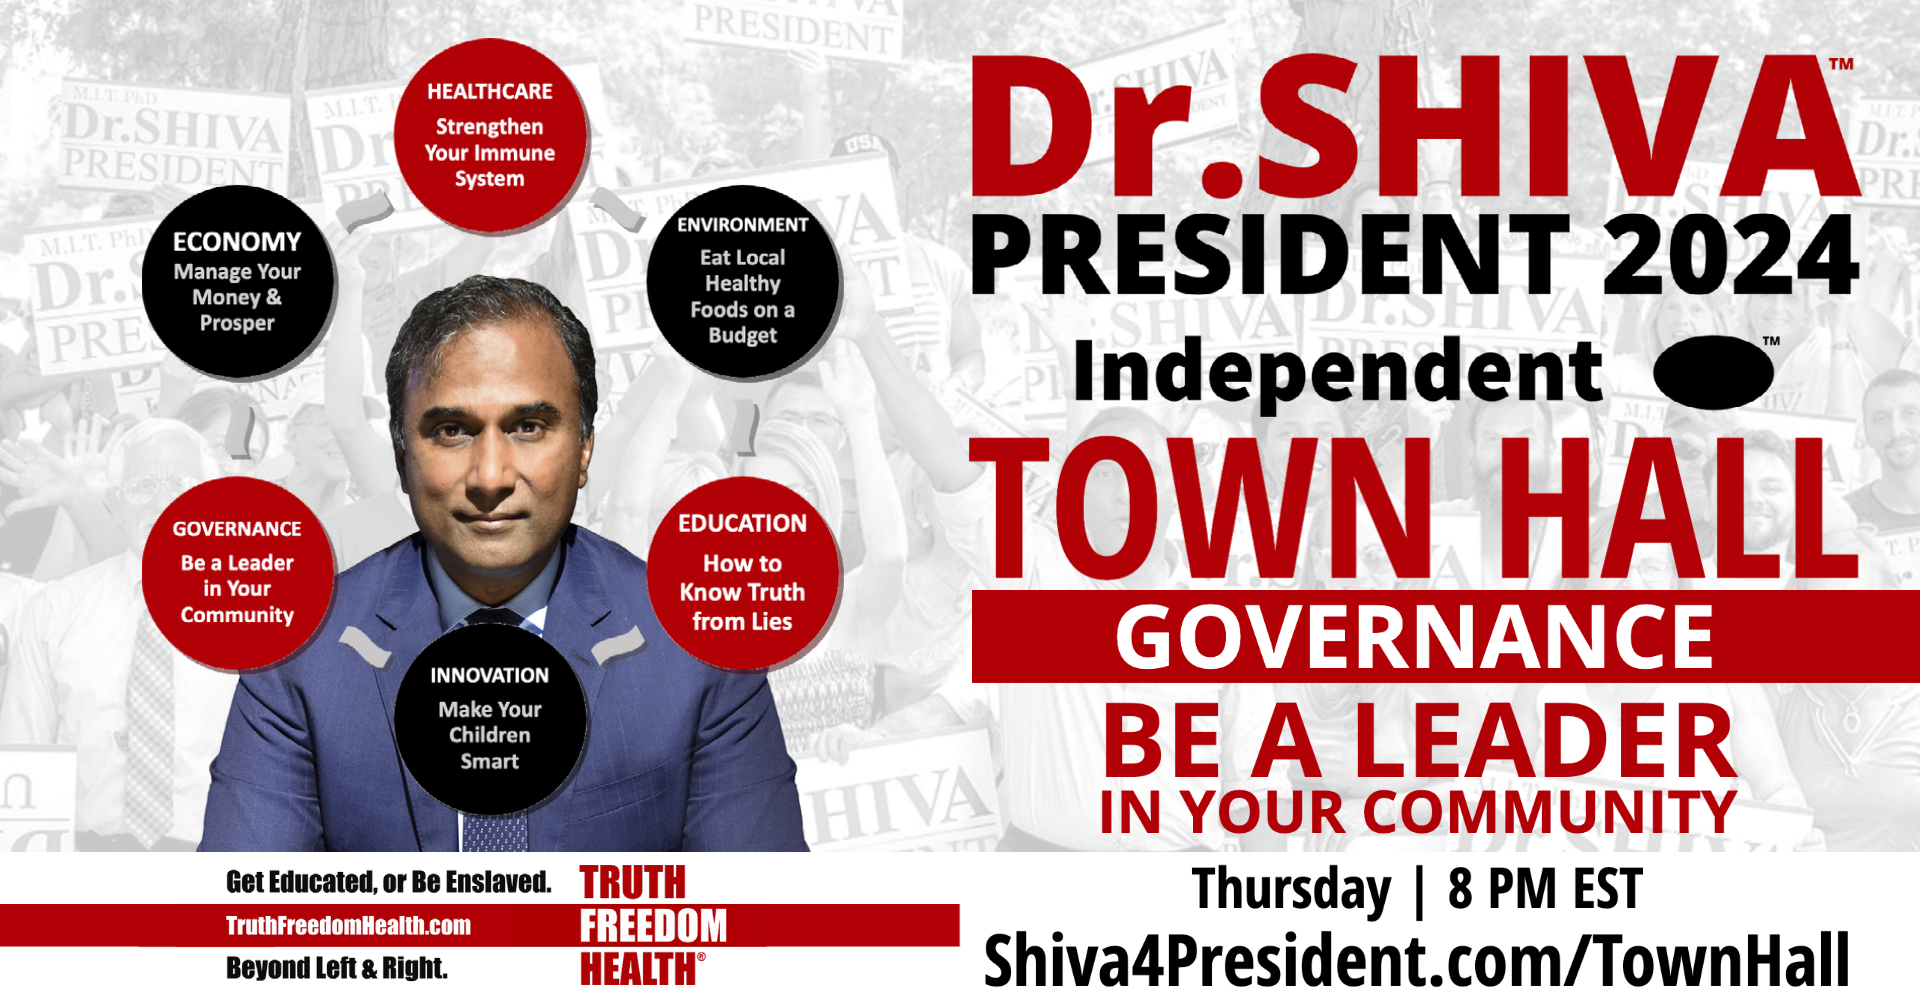 Dr.SHIVA TOWN HALL: Governance – Be A Leader In Your Community